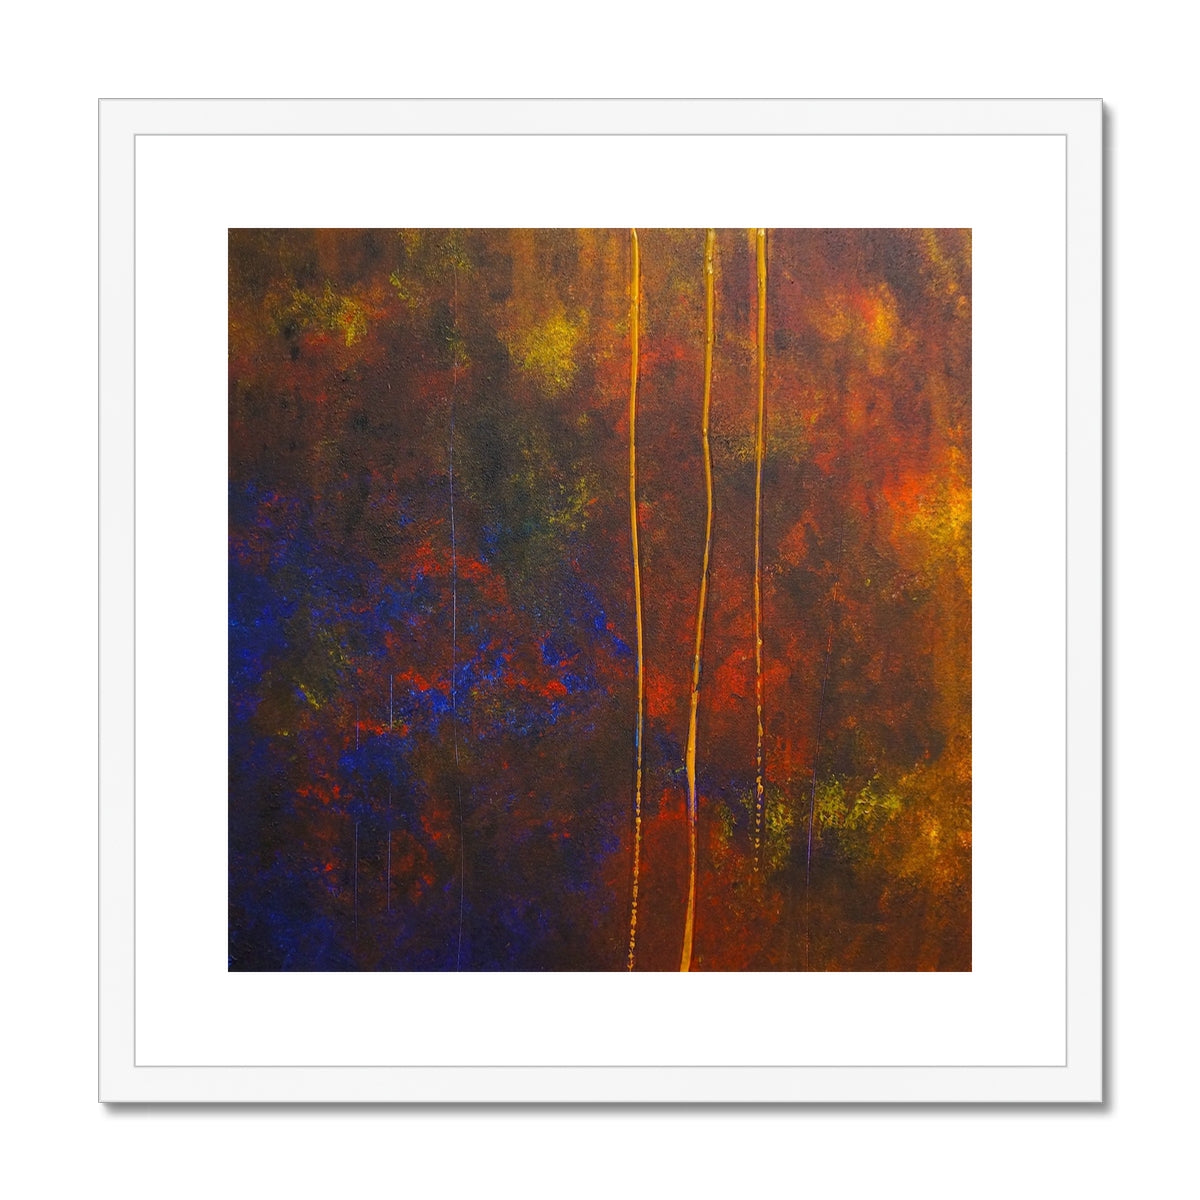 The Autumn Wood Abstract Painting | Framed & Mounted Prints From Scotland-Framed & Mounted Prints-Abstract & Impressionistic Art Gallery-20"x20"-White Frame-Paintings, Prints, Homeware, Art Gifts From Scotland By Scottish Artist Kevin Hunter